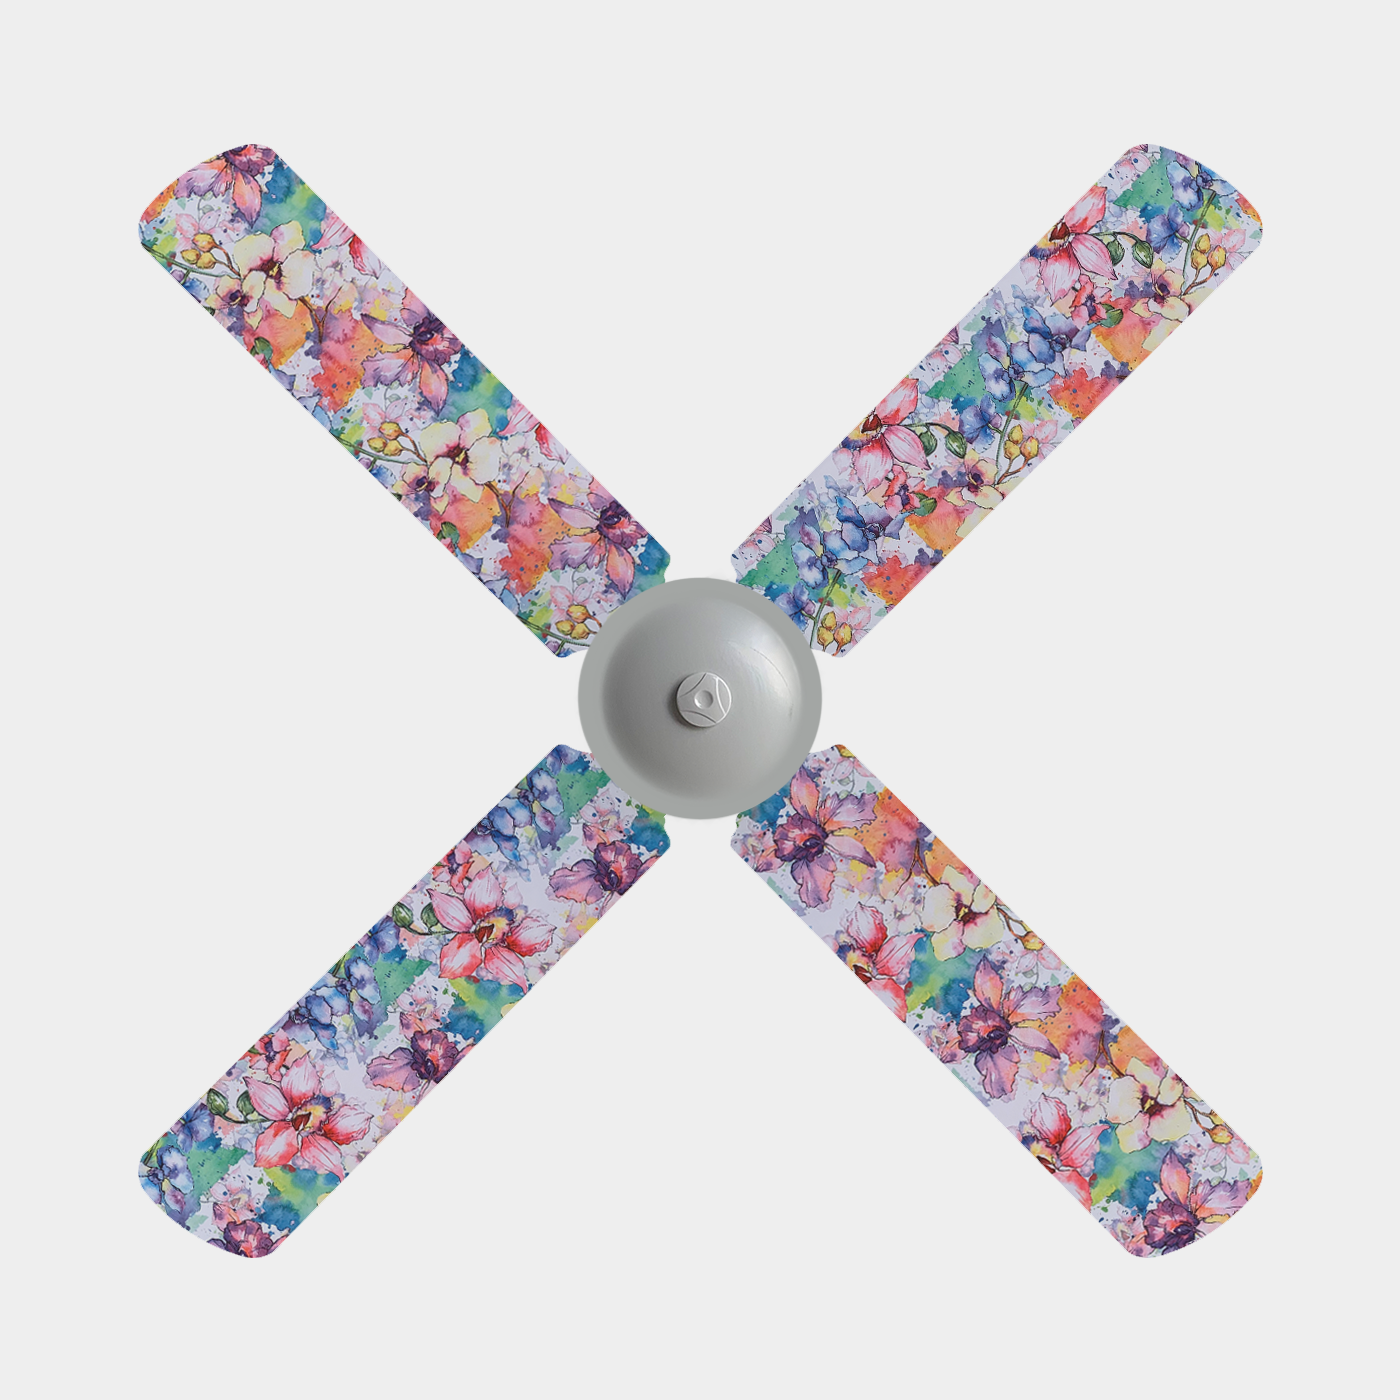 Pink, purple, orange, and white watercolour orchids ceiling fan blade covers on four blade fan